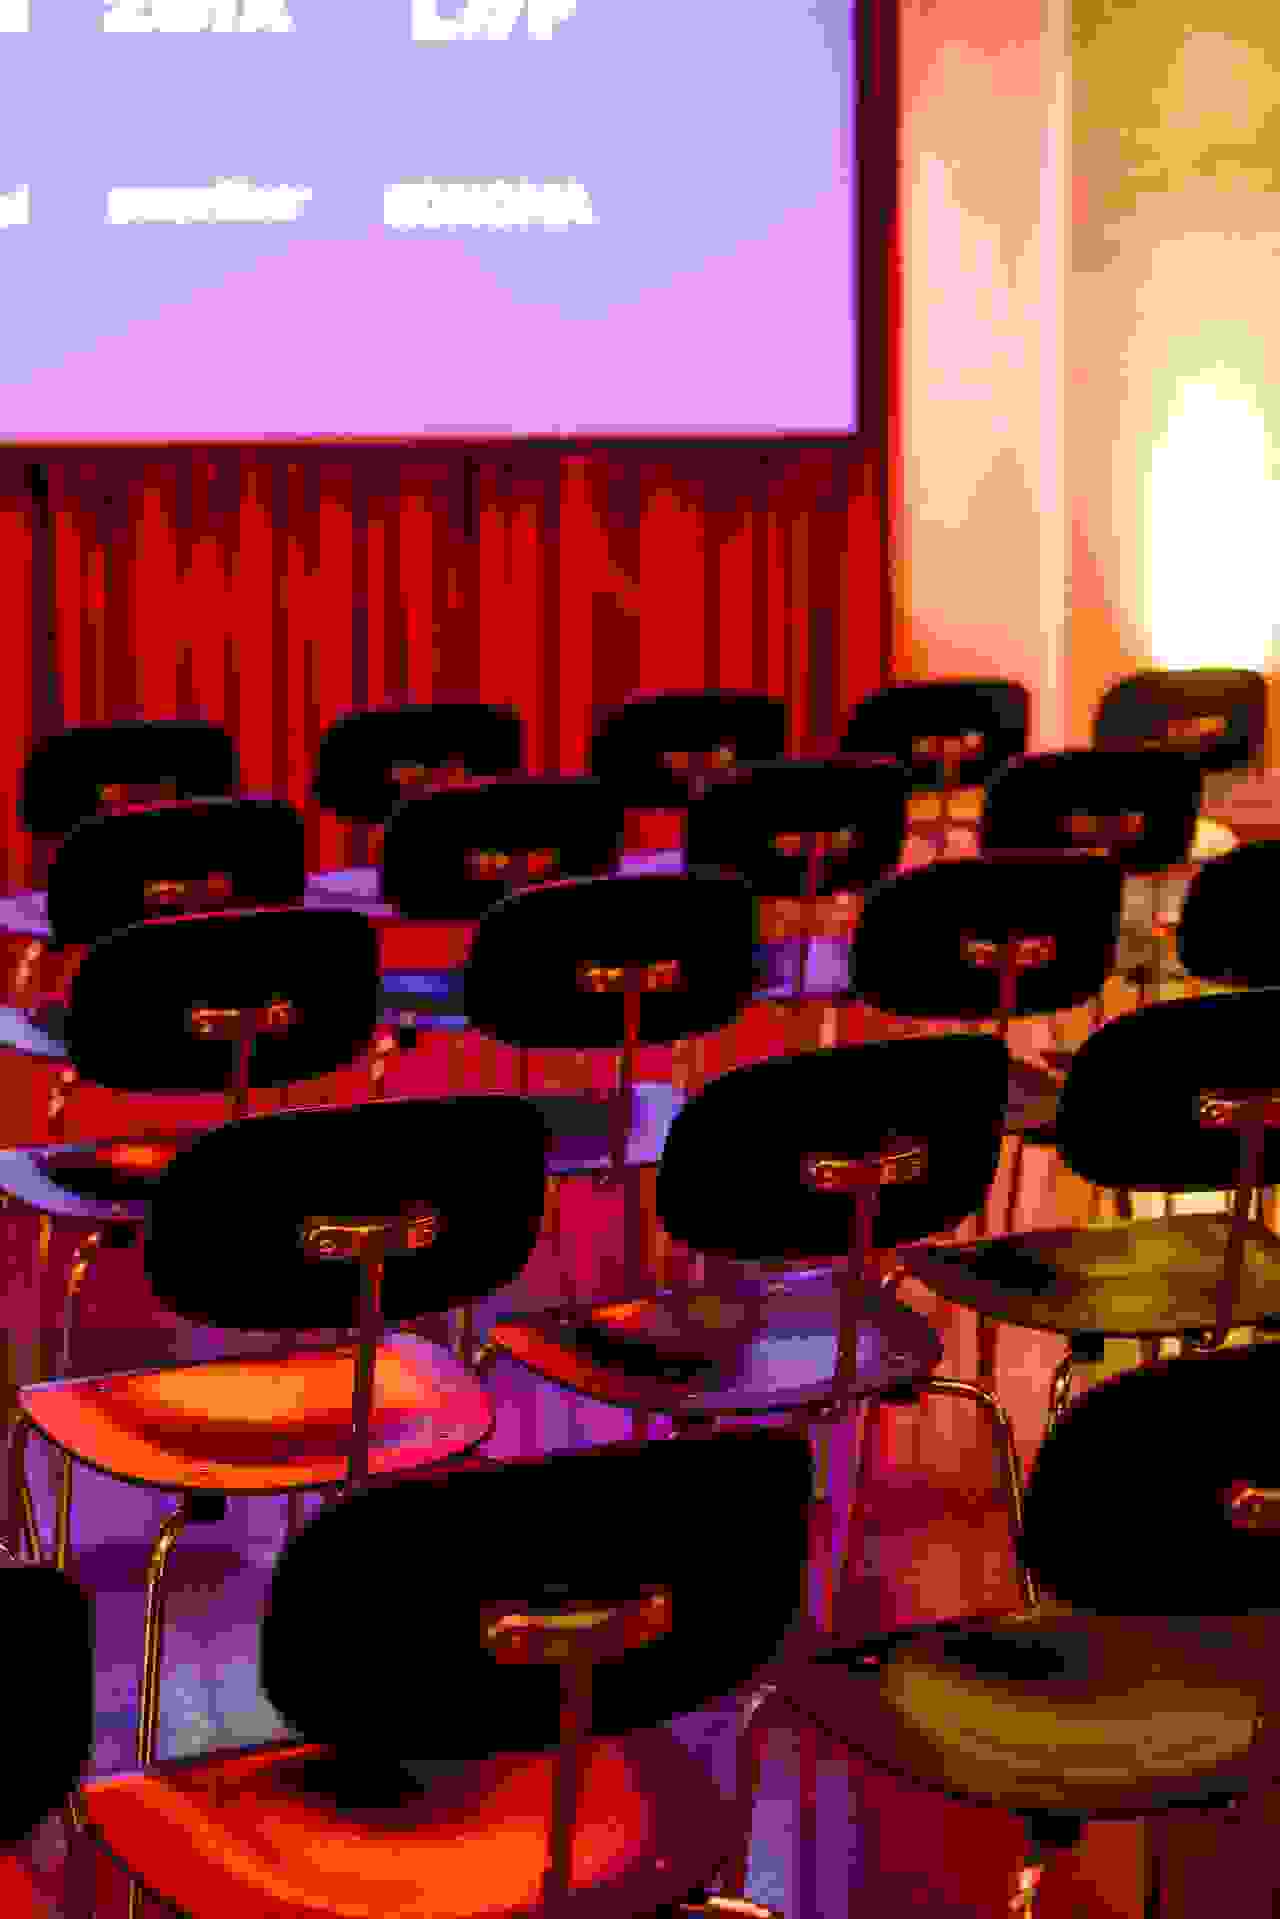 Papiersaal chairs, without people